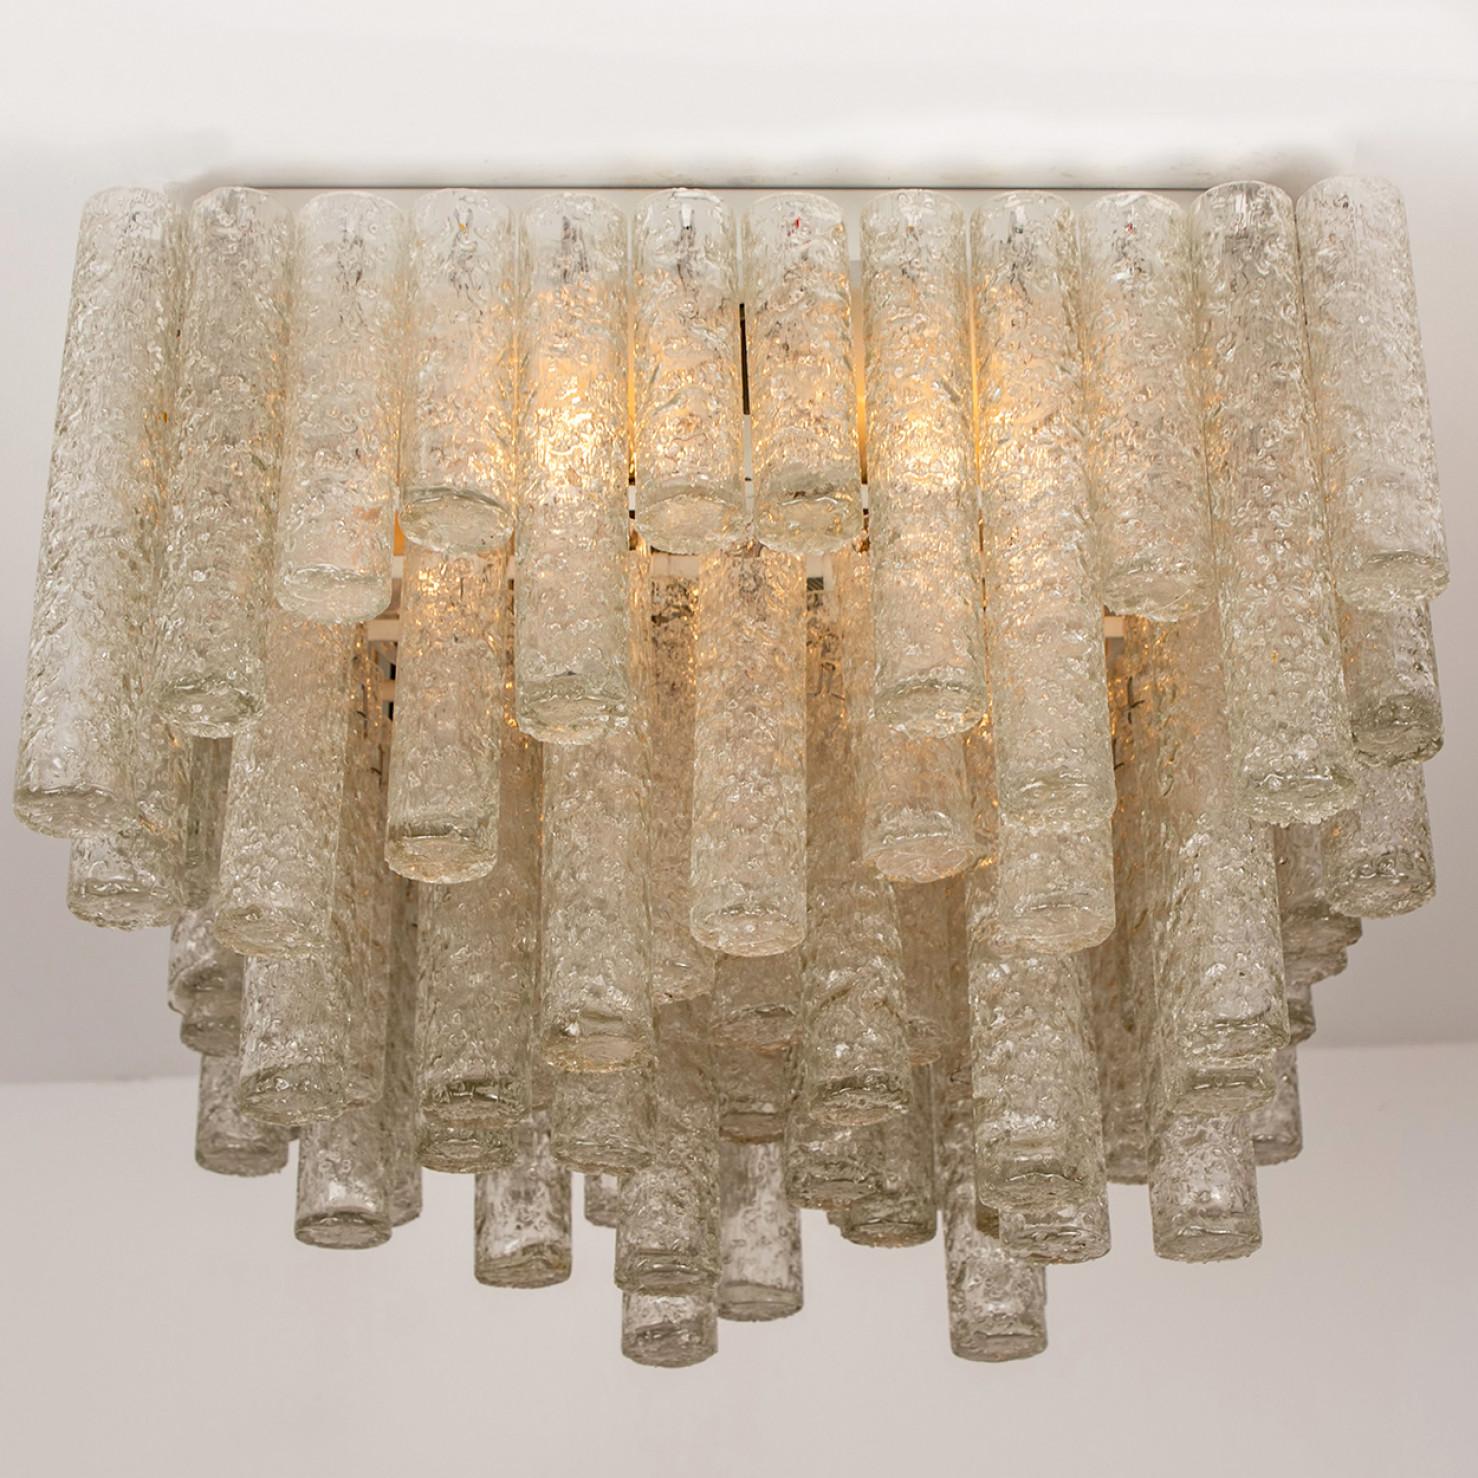 This huge beautiful square flush mount was manufactured by Doria in Germany in the 1960s. It consists 96 several organic glass tubes of different lengths. This huge square flush mount is very unique and rare to find.

Two items in stock. To build